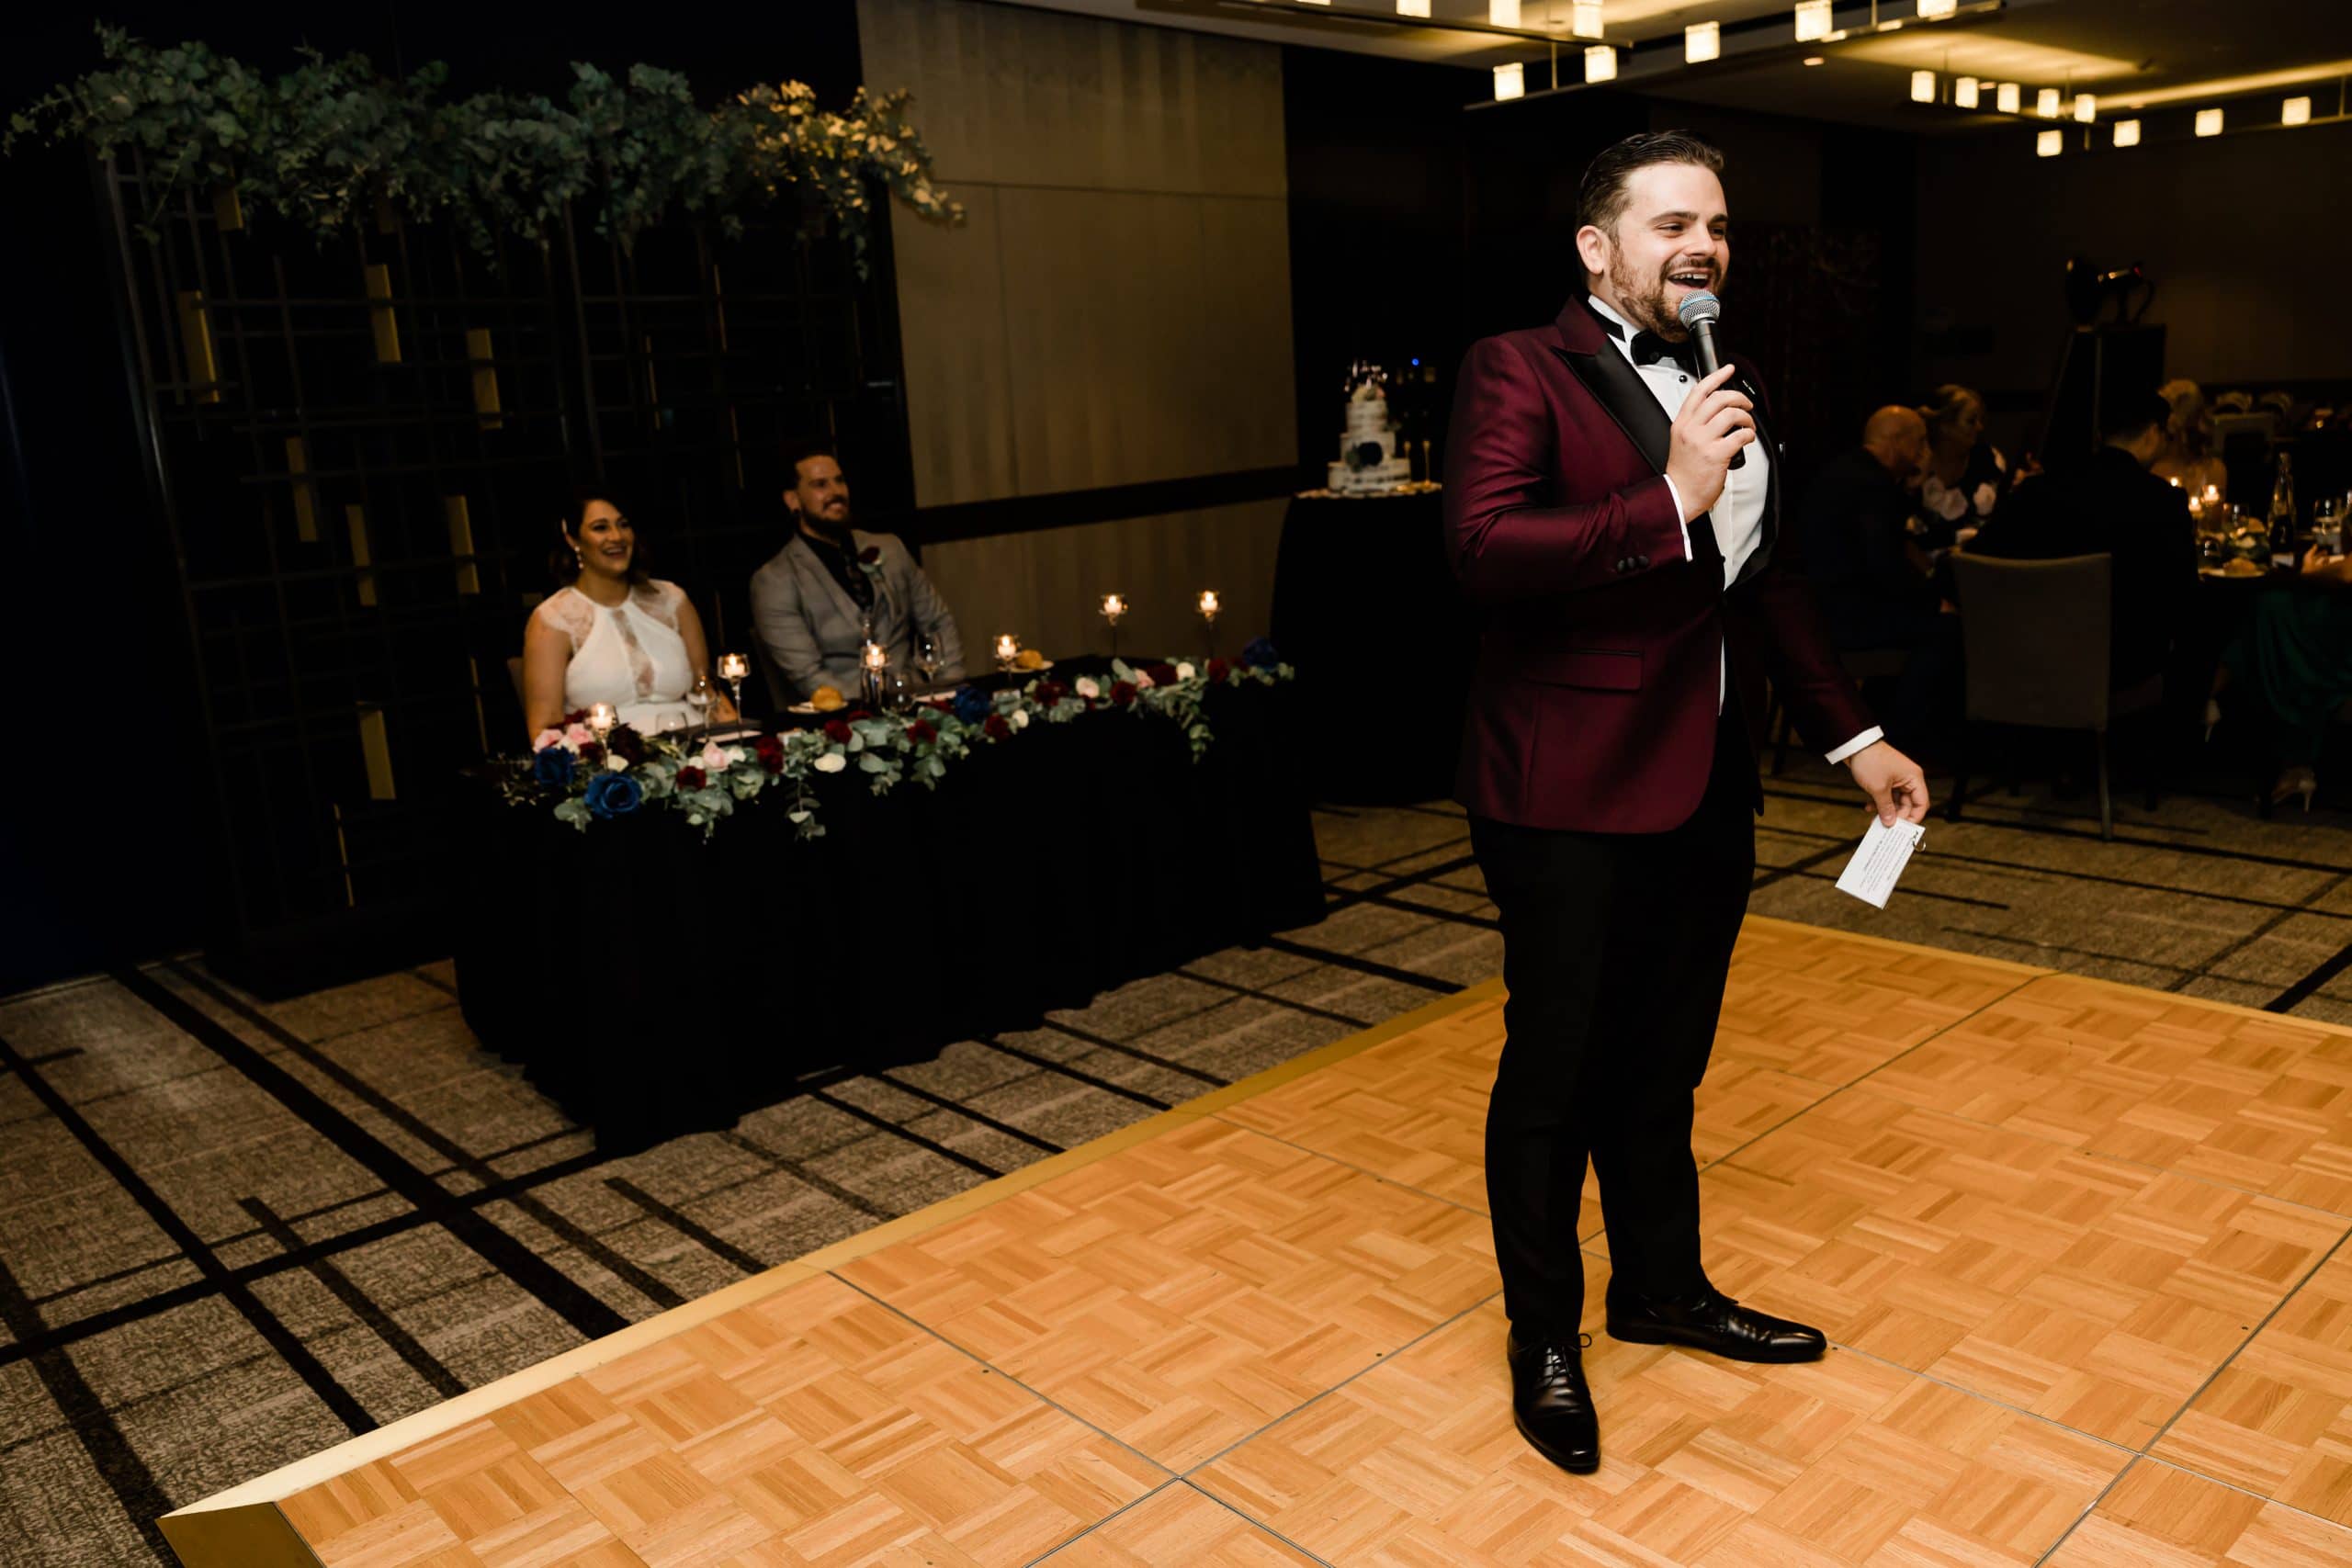 Nathan Cassar smiling and speaking into a microphone with a bride and groom sitting behind